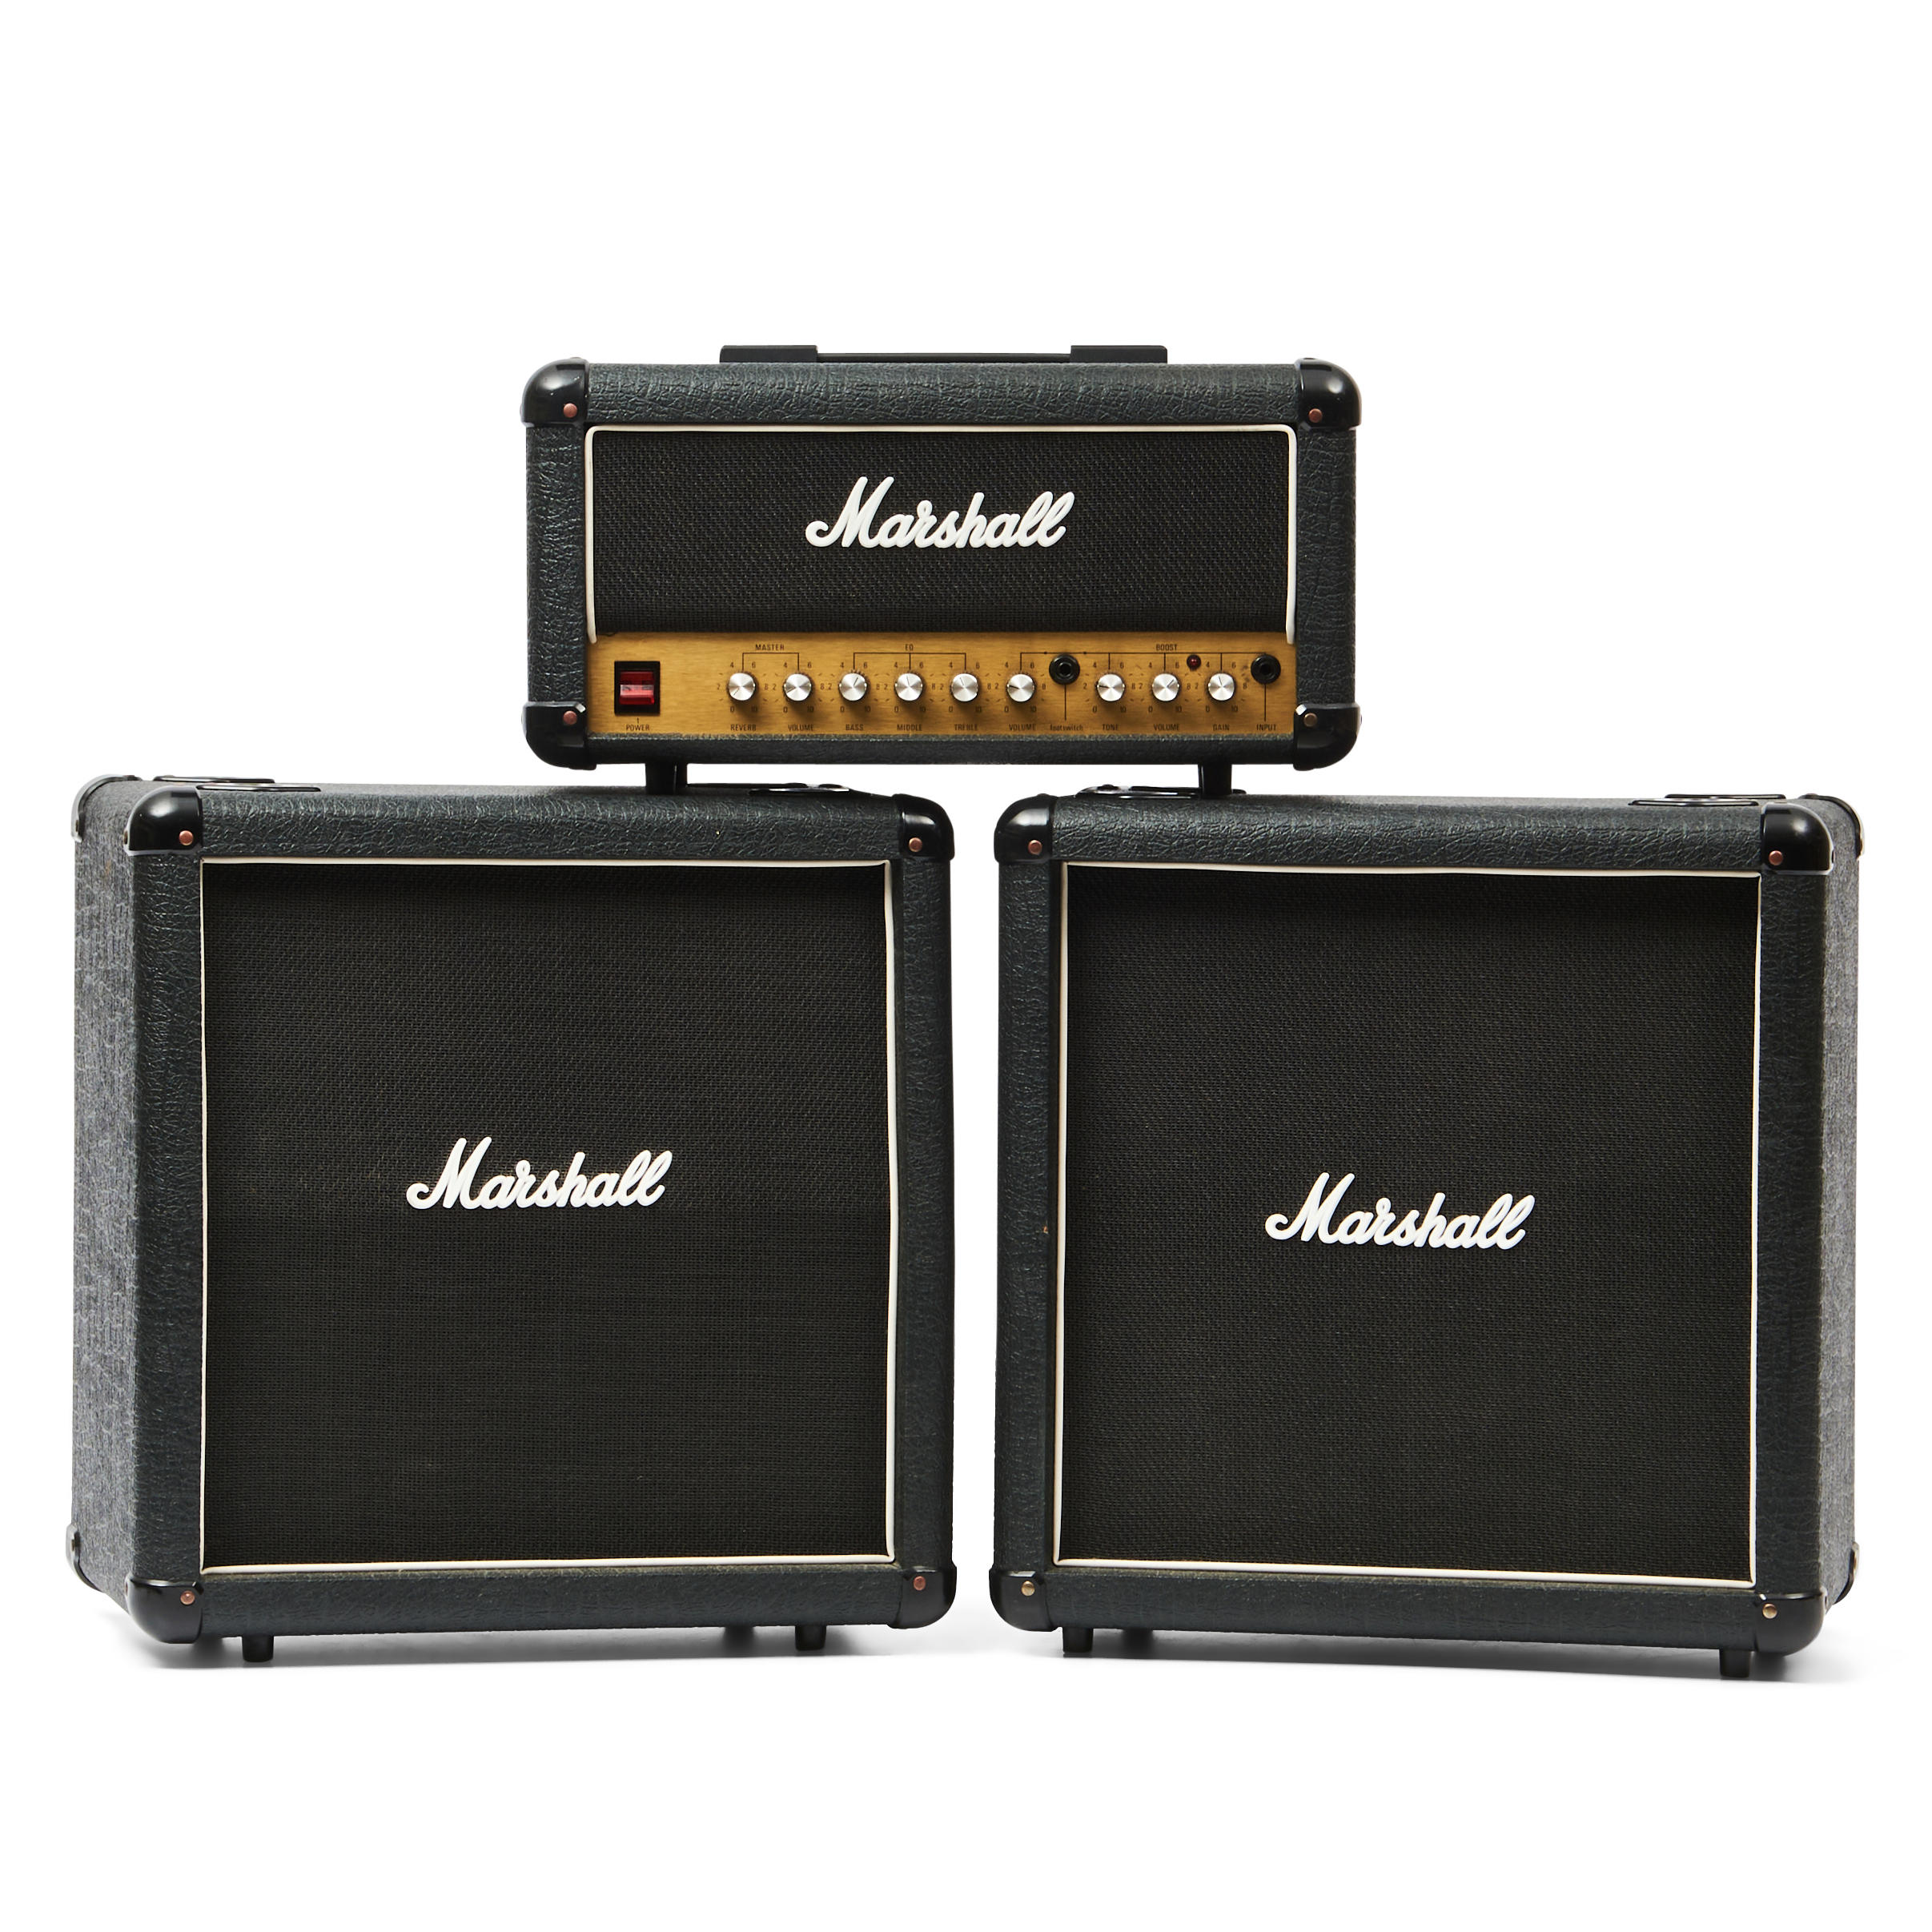 MARSHALL MINI STACK AND TWO MATCHING